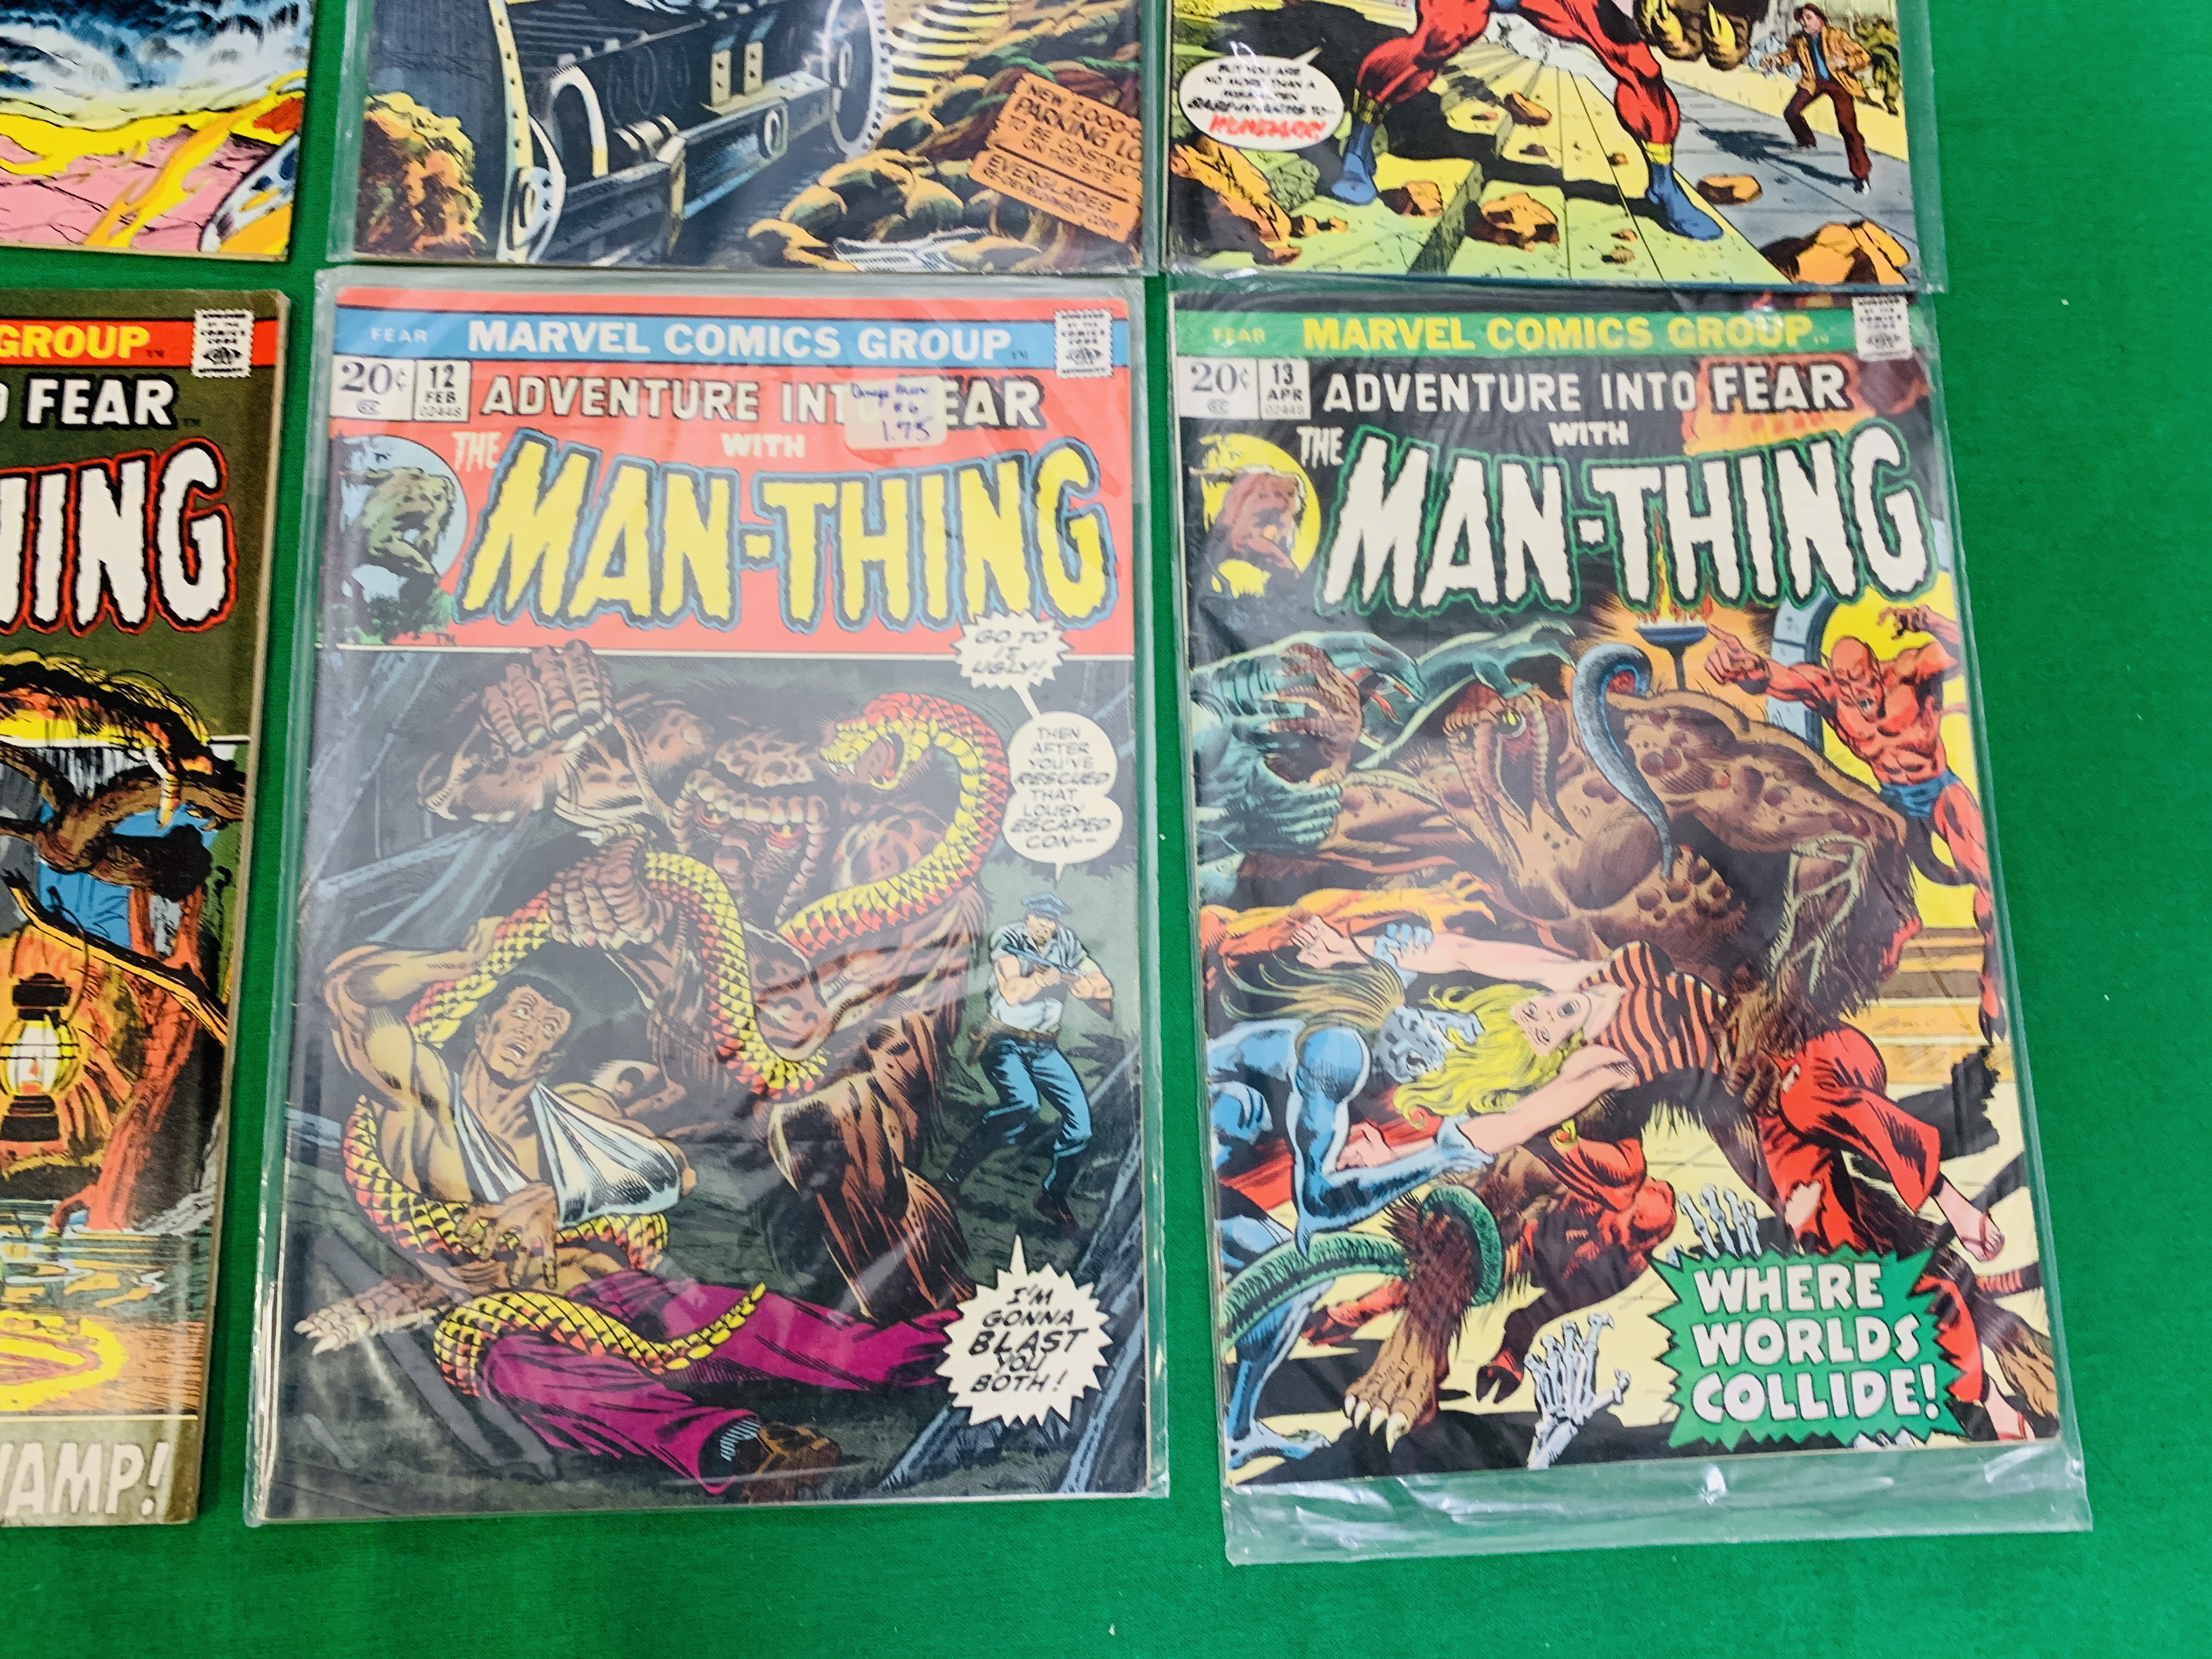 MARVEL COMICS ADVENTURE INTO FEAR WITH MAN-THING NO. 10 - 17, 19, FROM 1973. NO 19. - Image 3 of 6